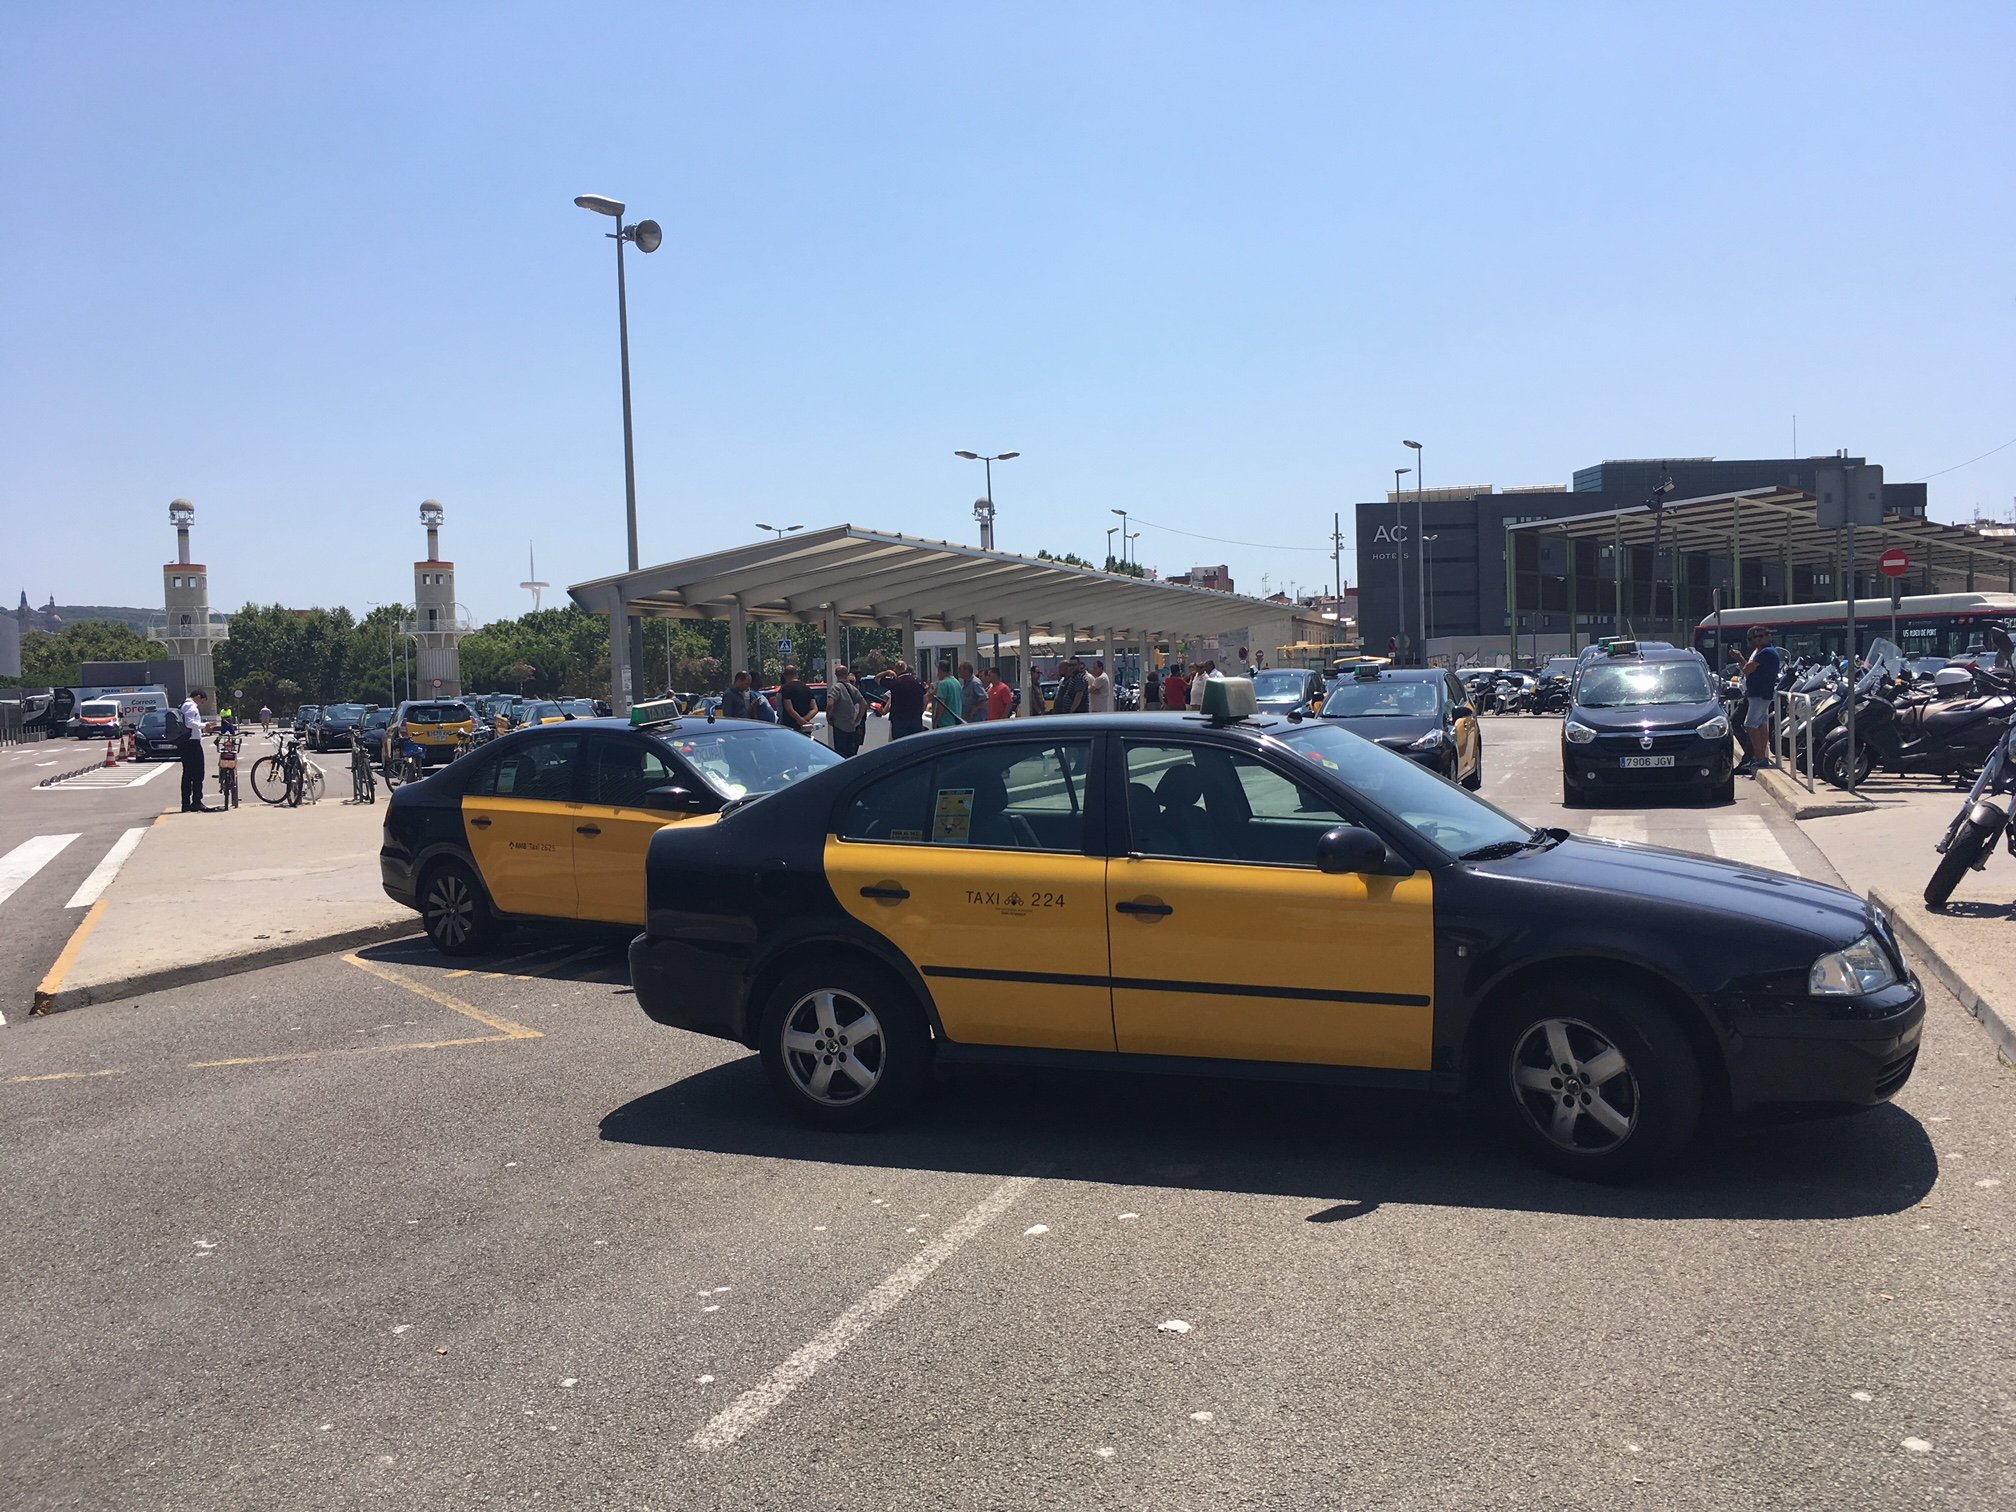 Barcelona taxi drivers strike again, stalling the city